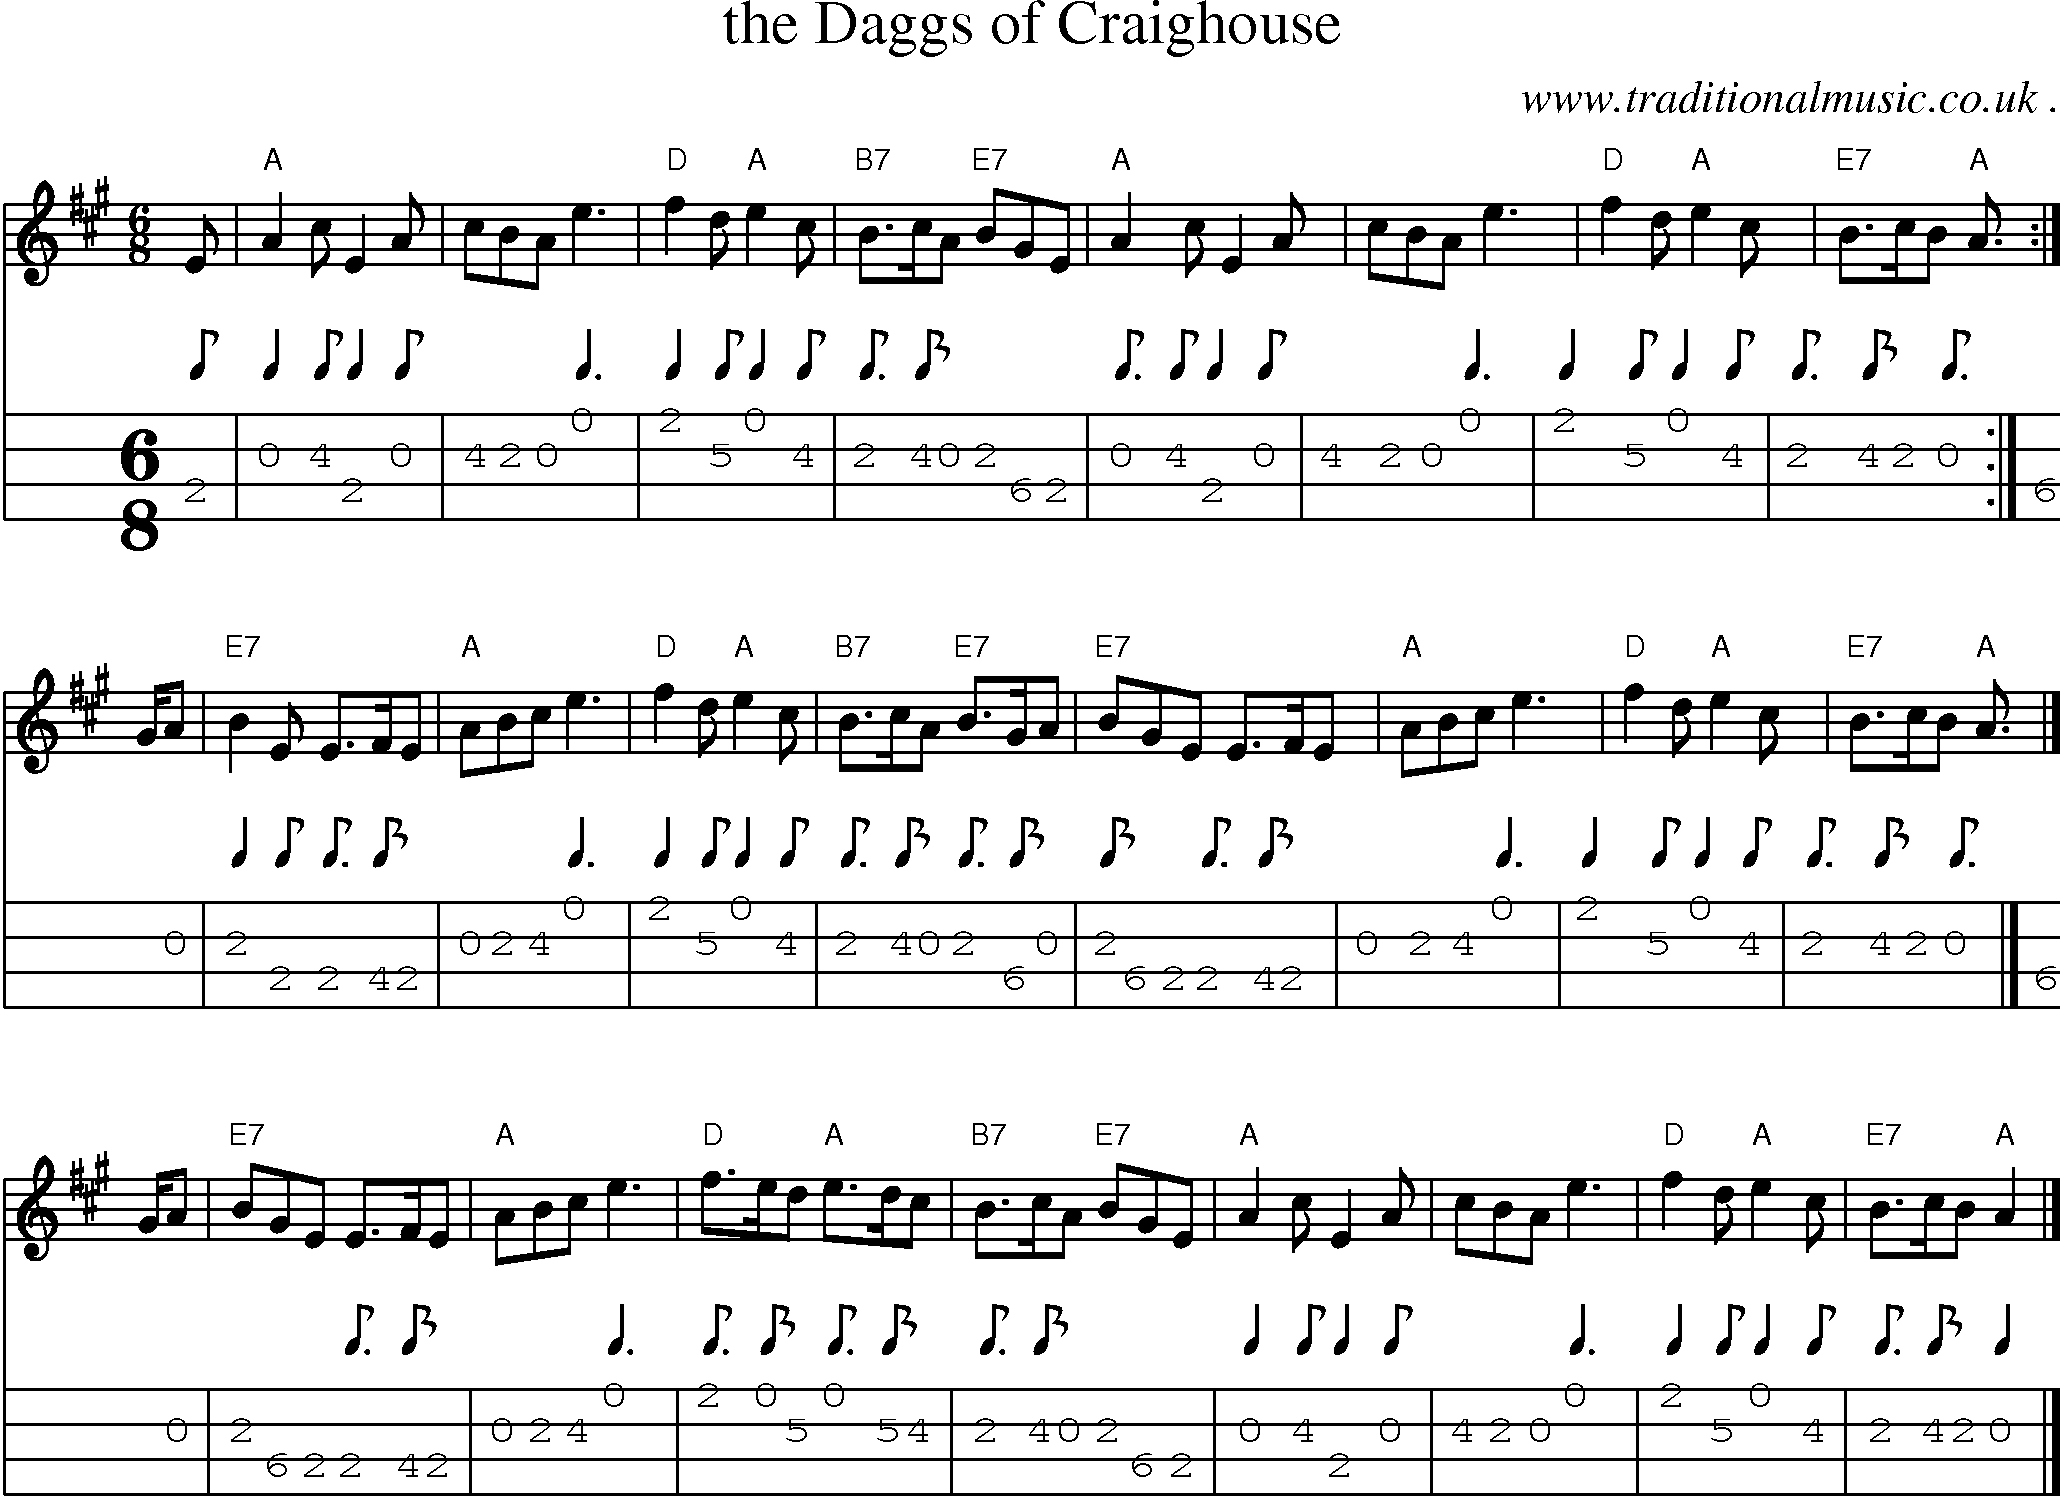 Sheet-music  score, Chords and Mandolin Tabs for The Daggs Of Craighouse